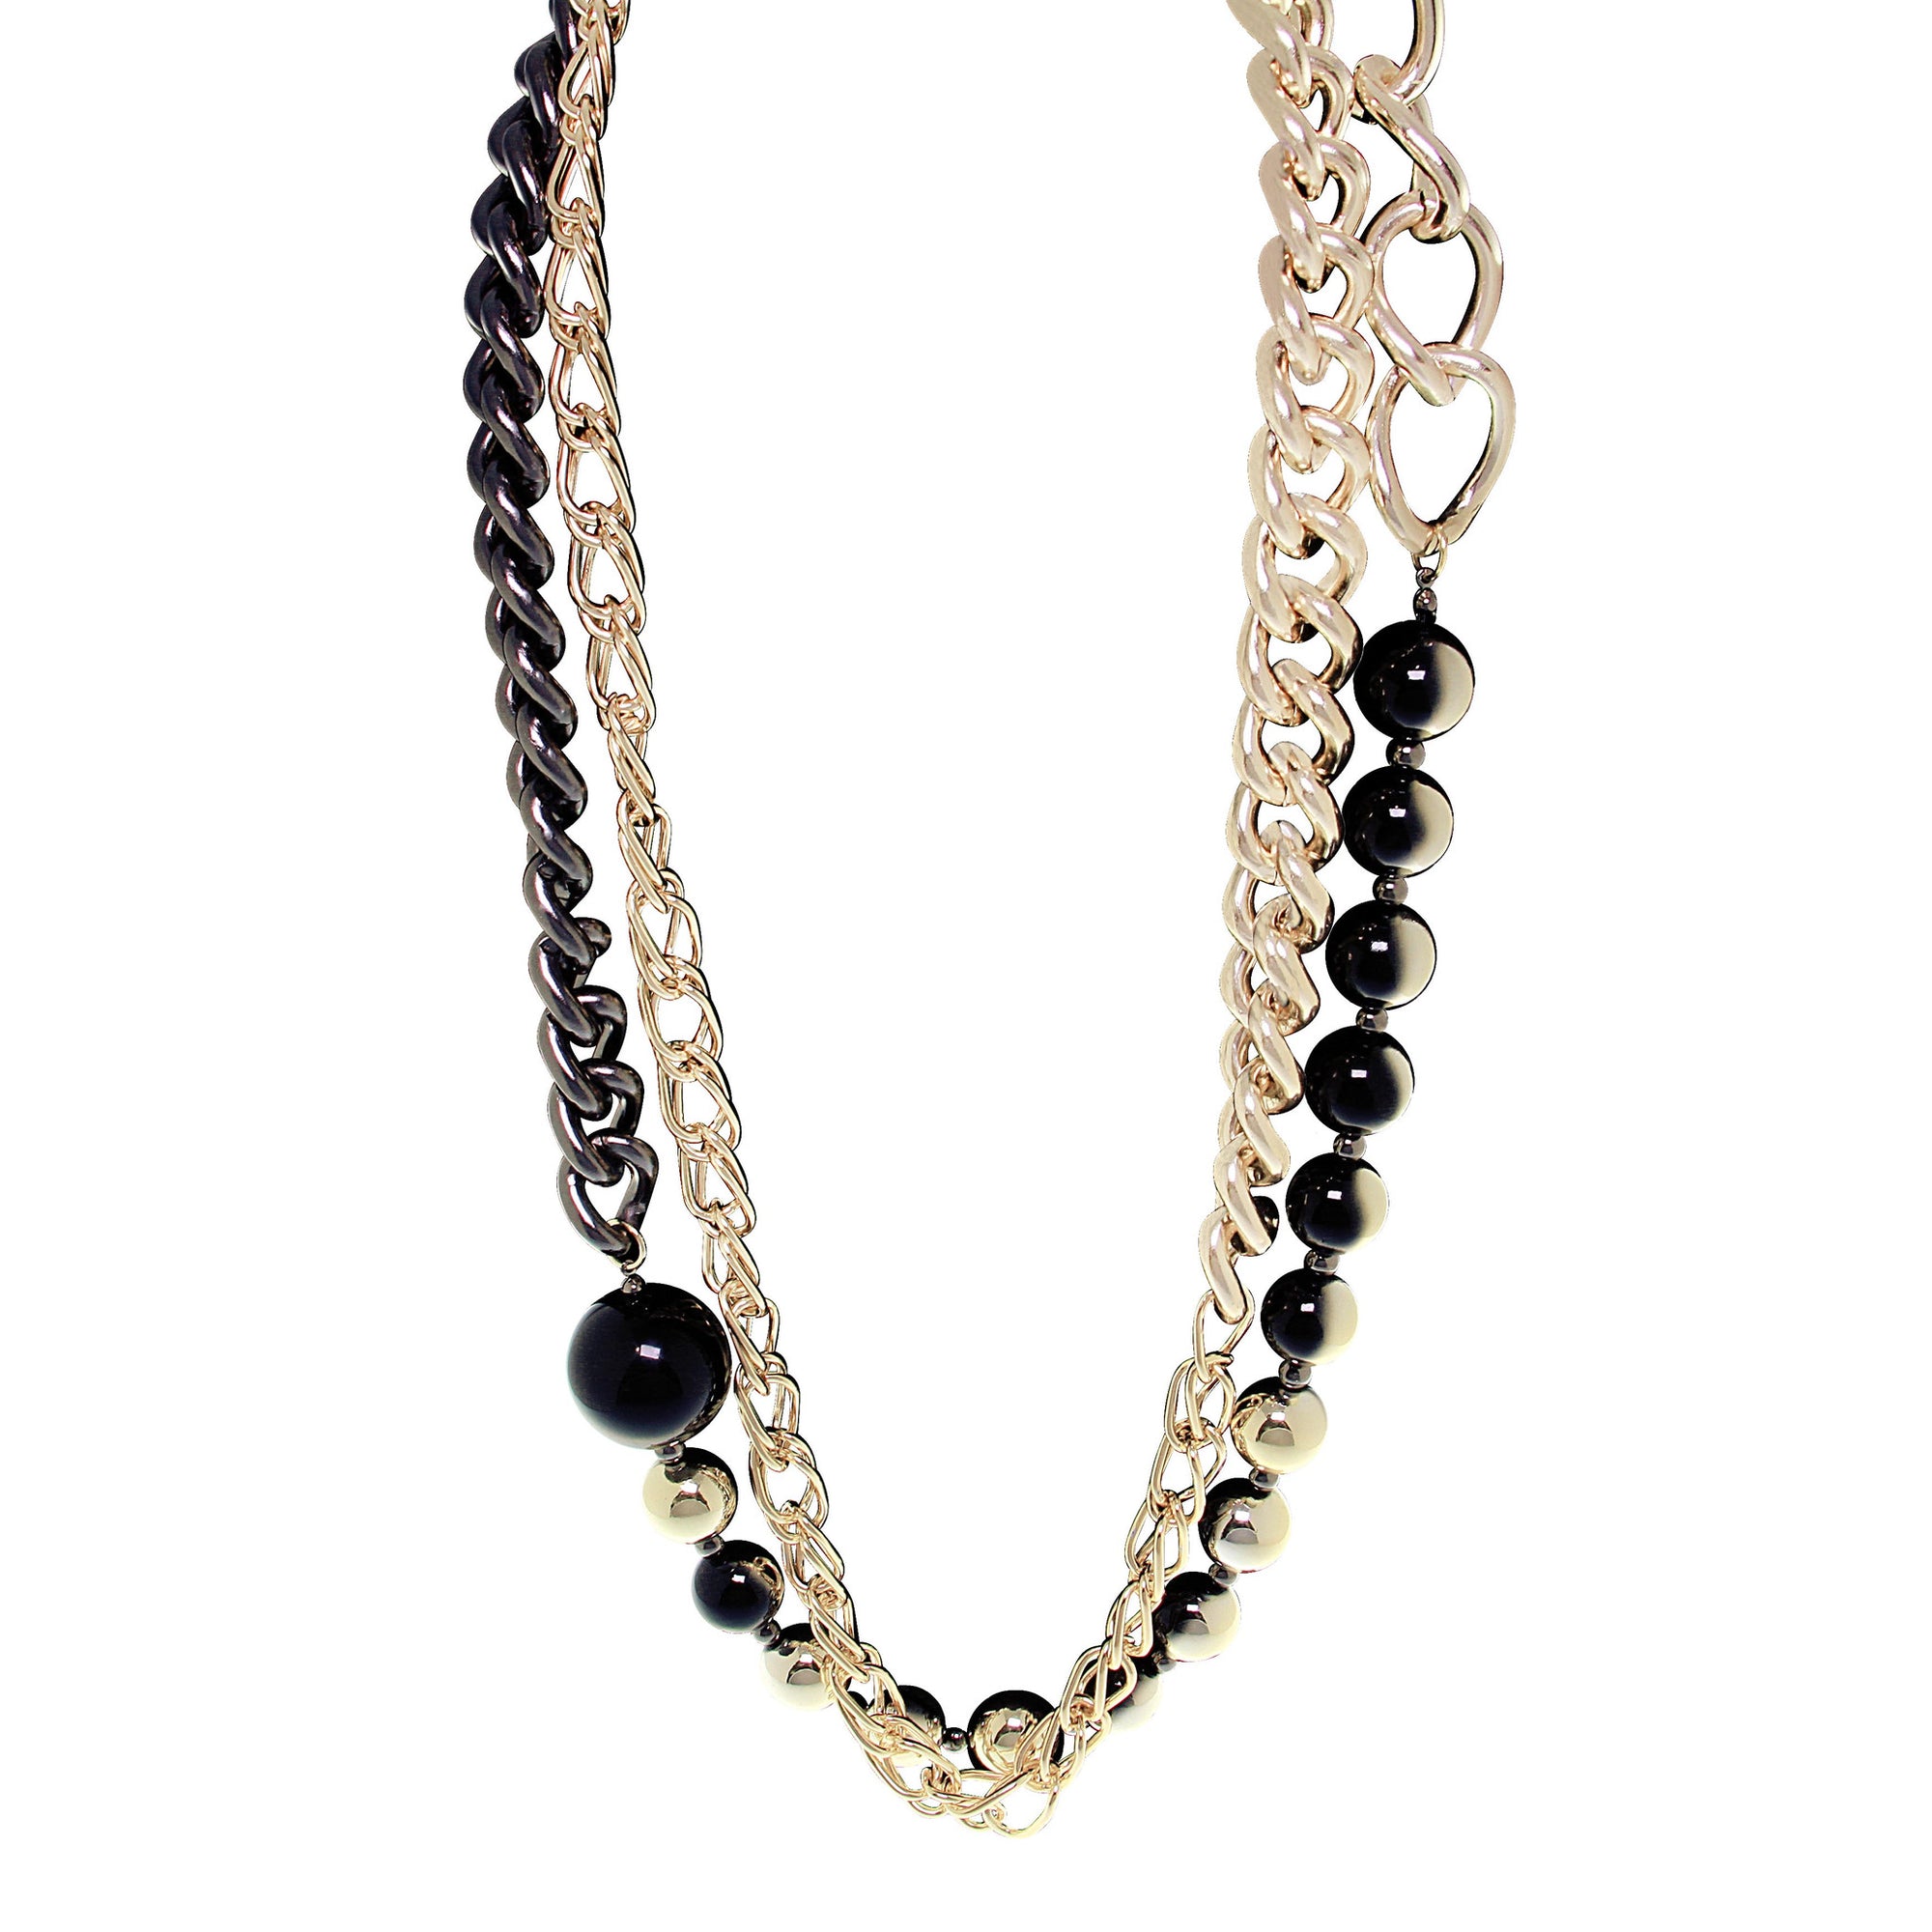 "Ball and Chain" Ombre Statement Necklace